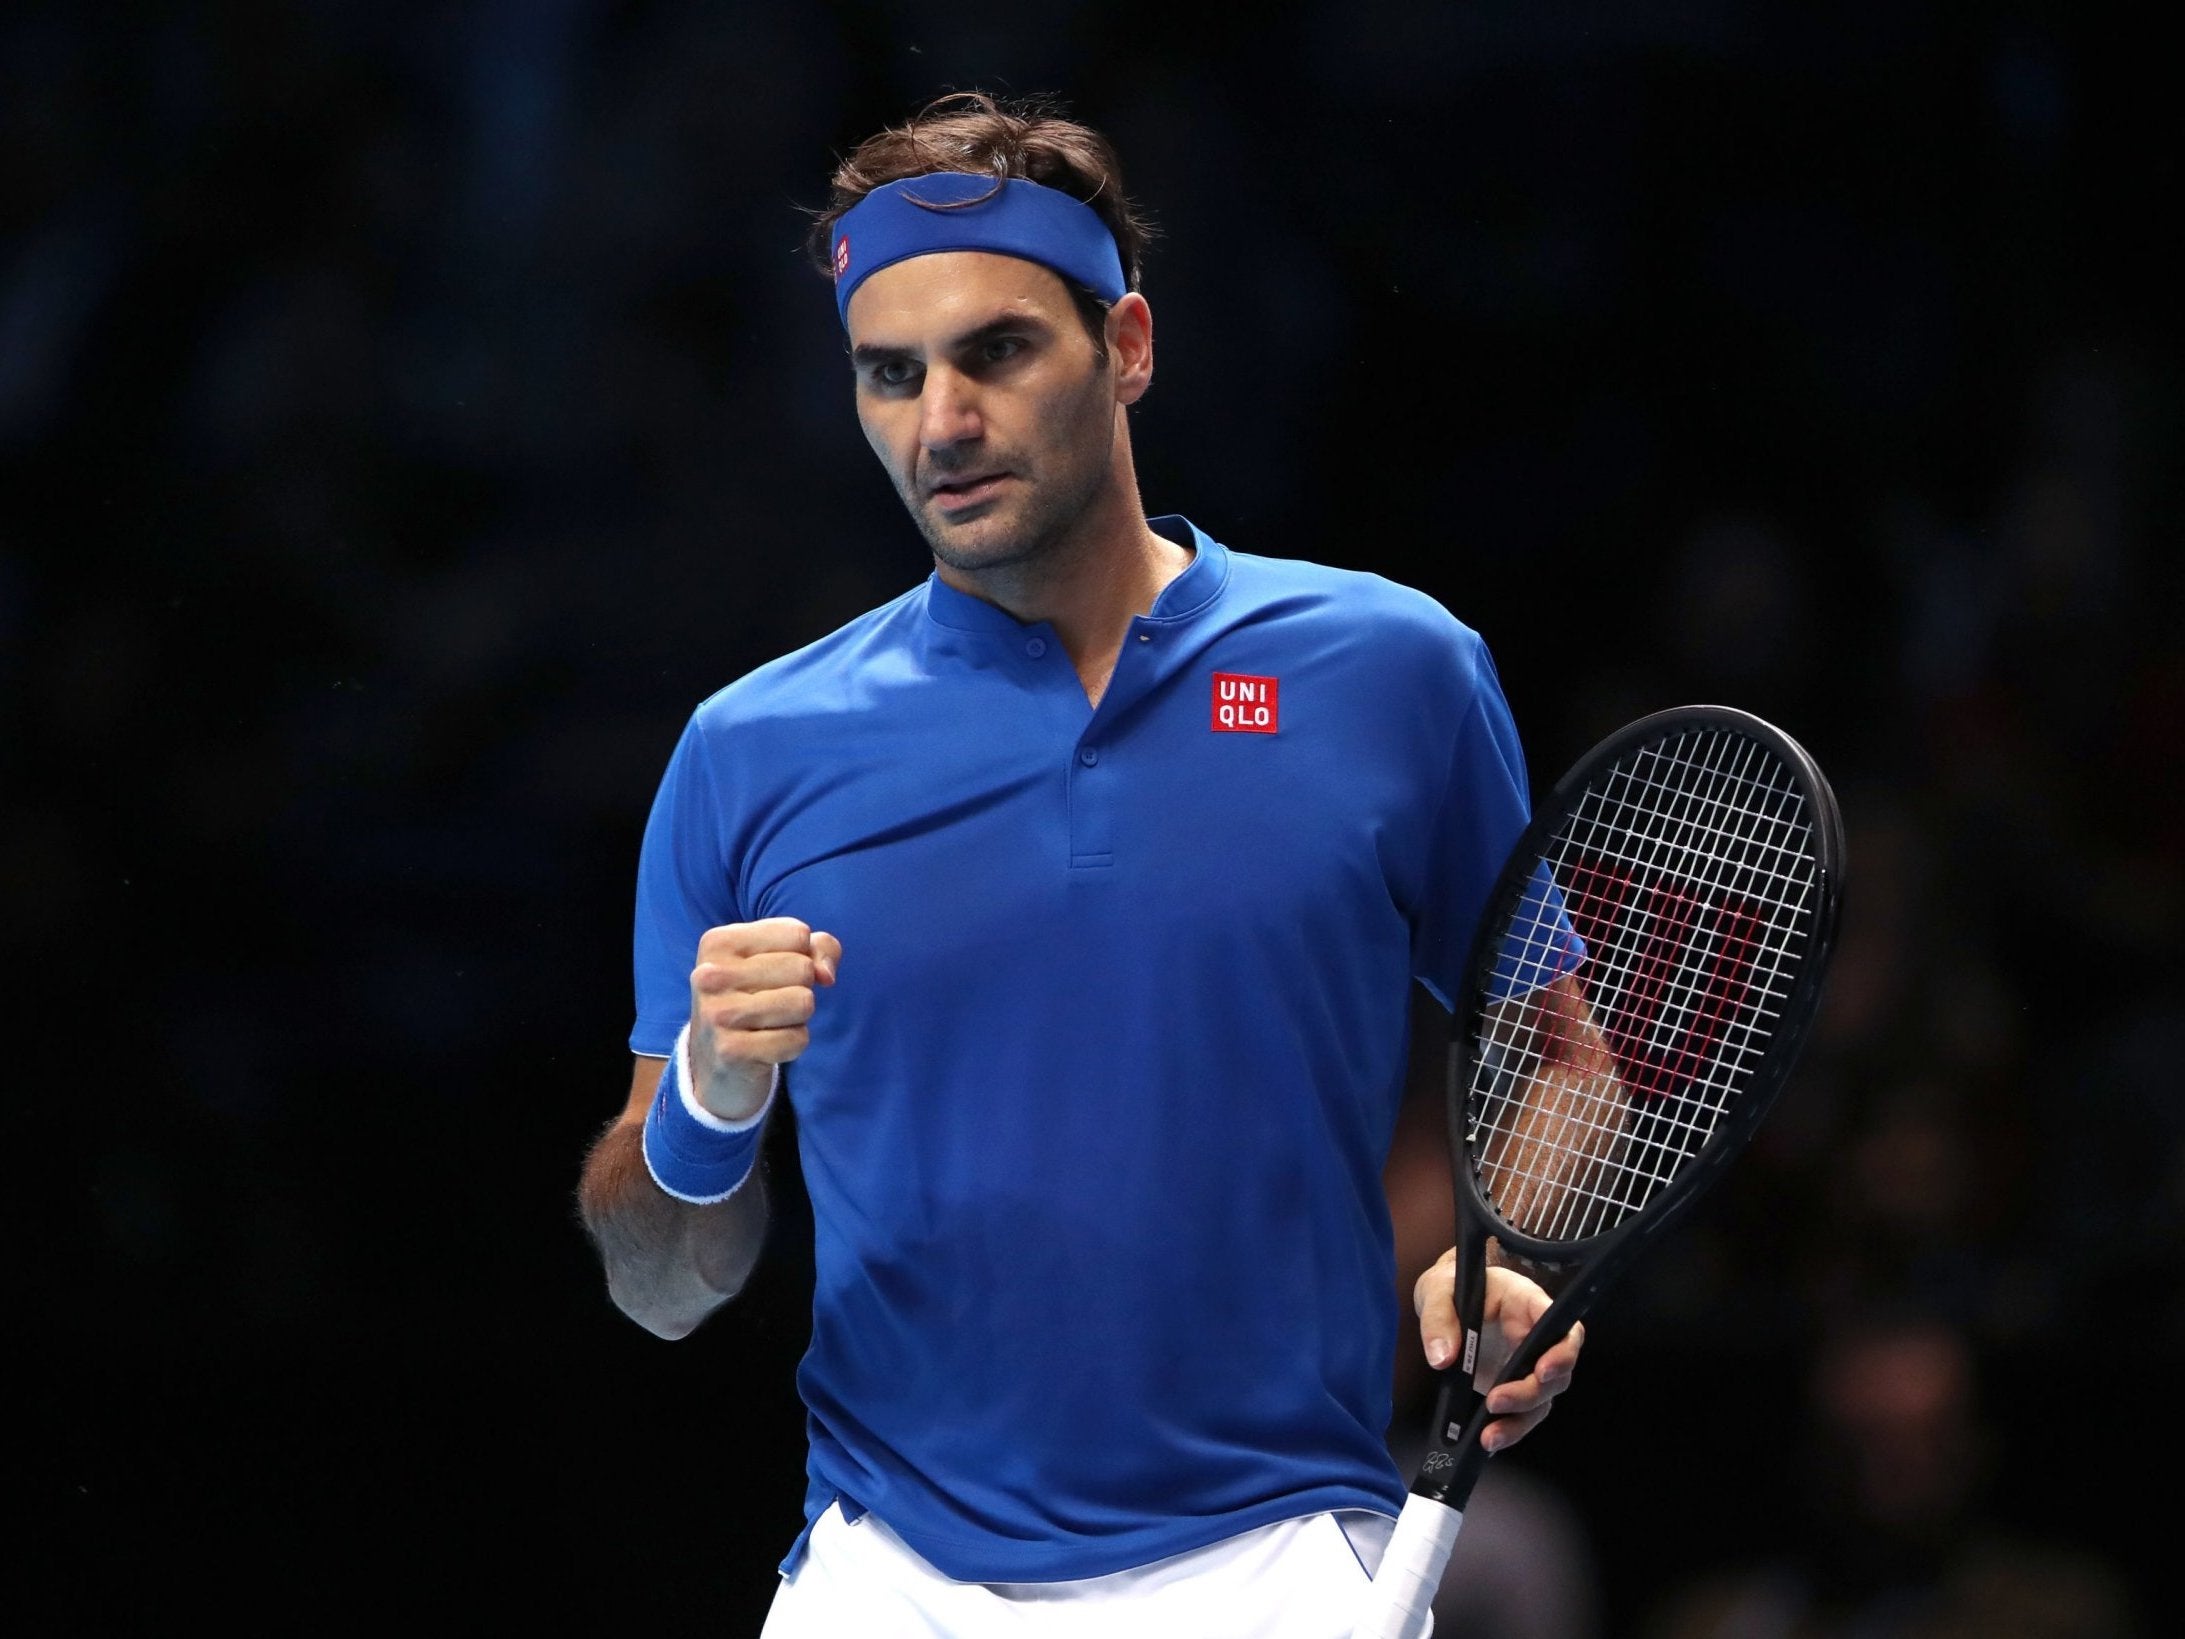 Roger Federer celebrates a point during the first set